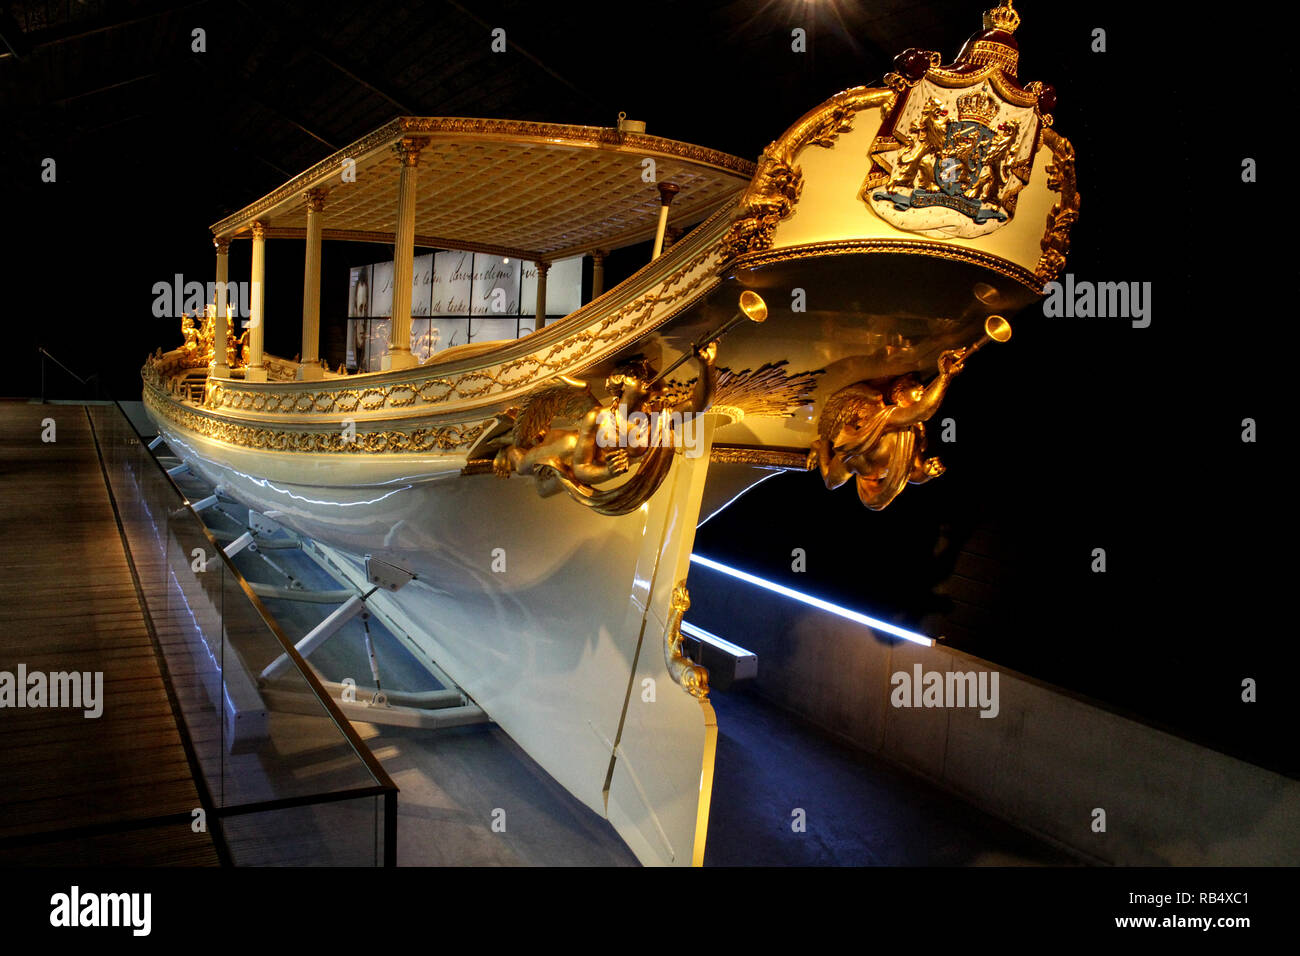 The Dutch Royal Barge at the National Maritime Museum, Amsterdam, Netherlands Stock Photo